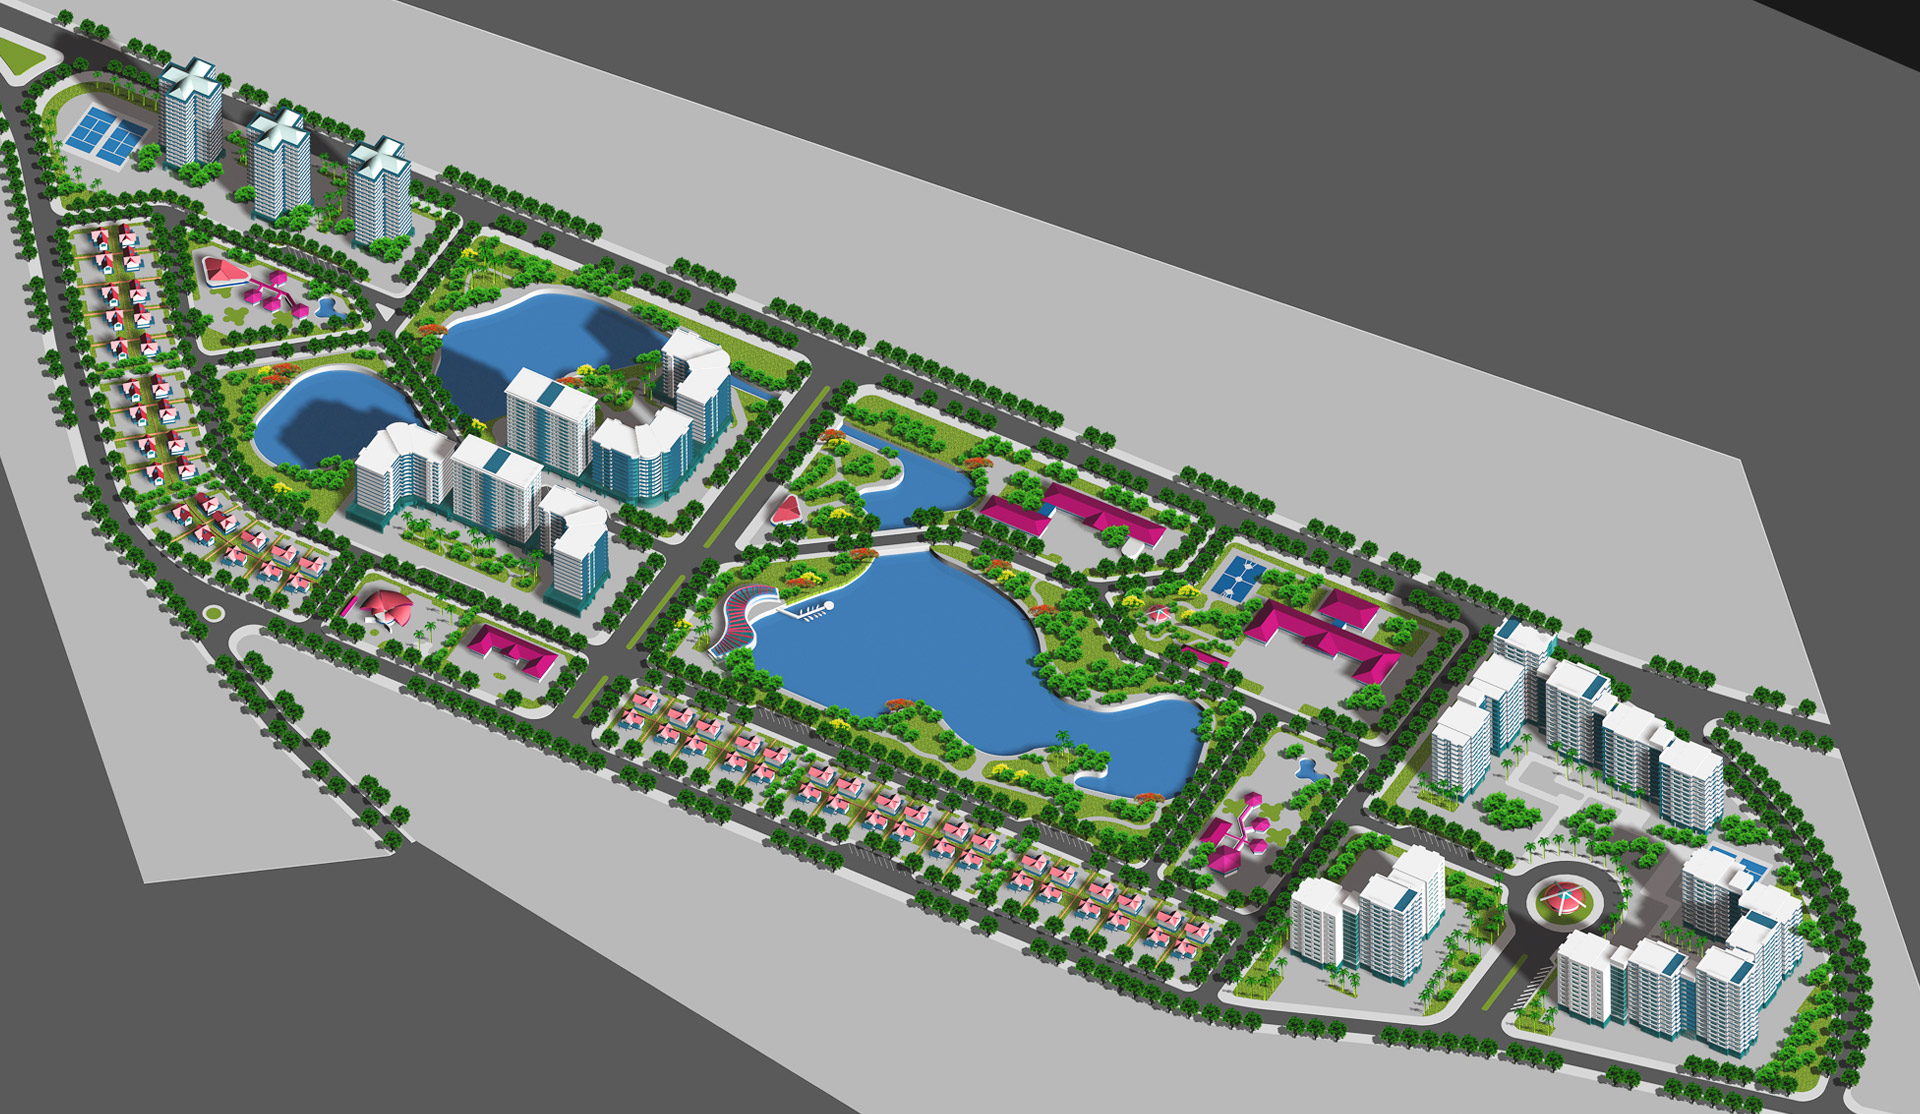 Urban planning such as residential zone, tourist destination, public places, harbor zone and traffic systems